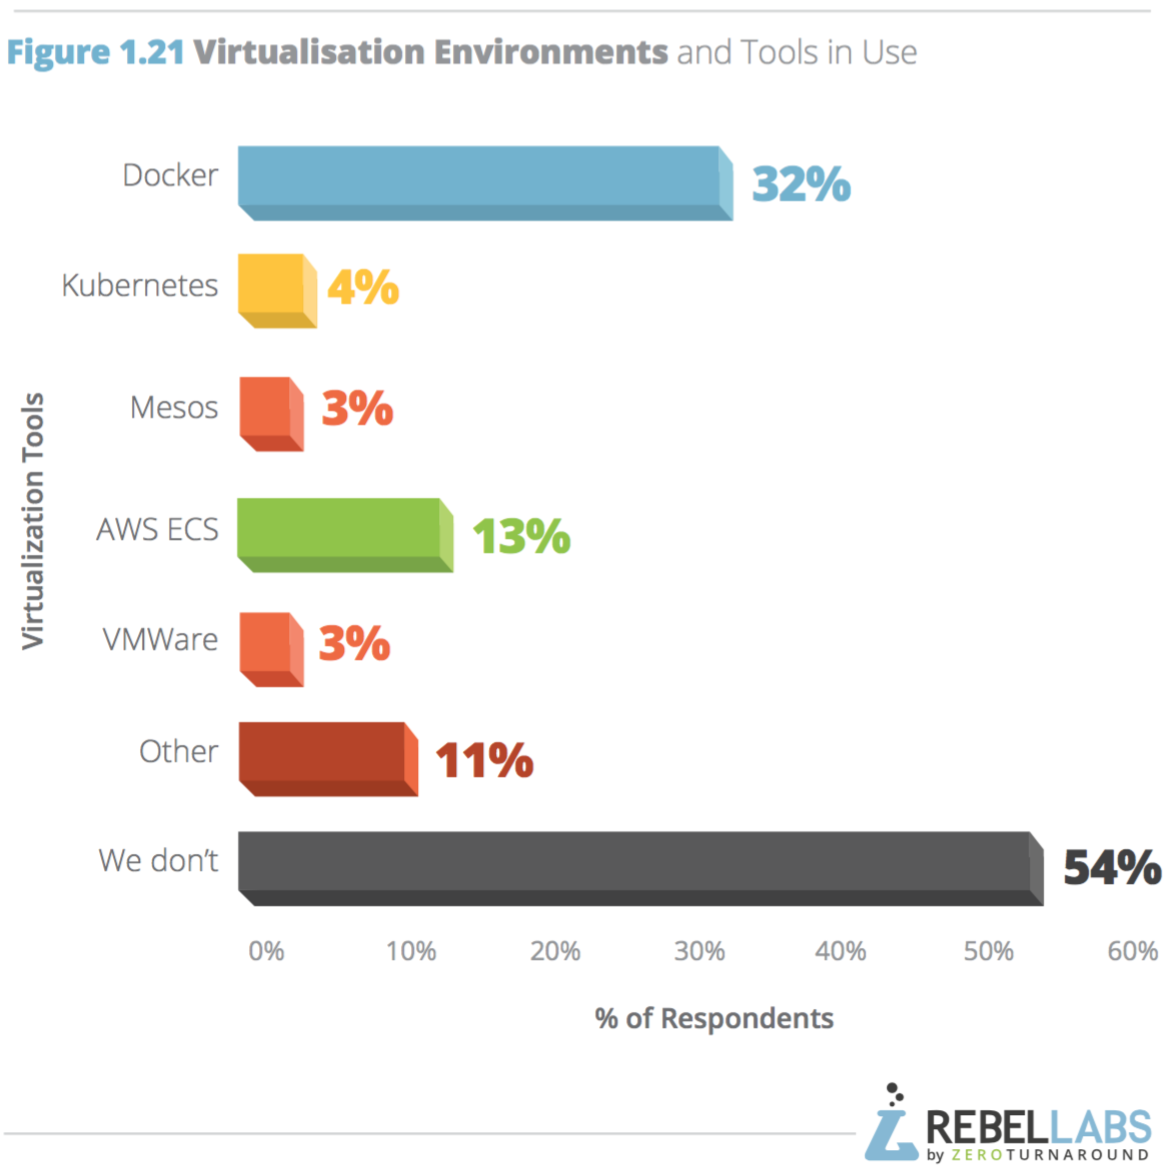 bar chart breakdown of virtualization environments and tools usage